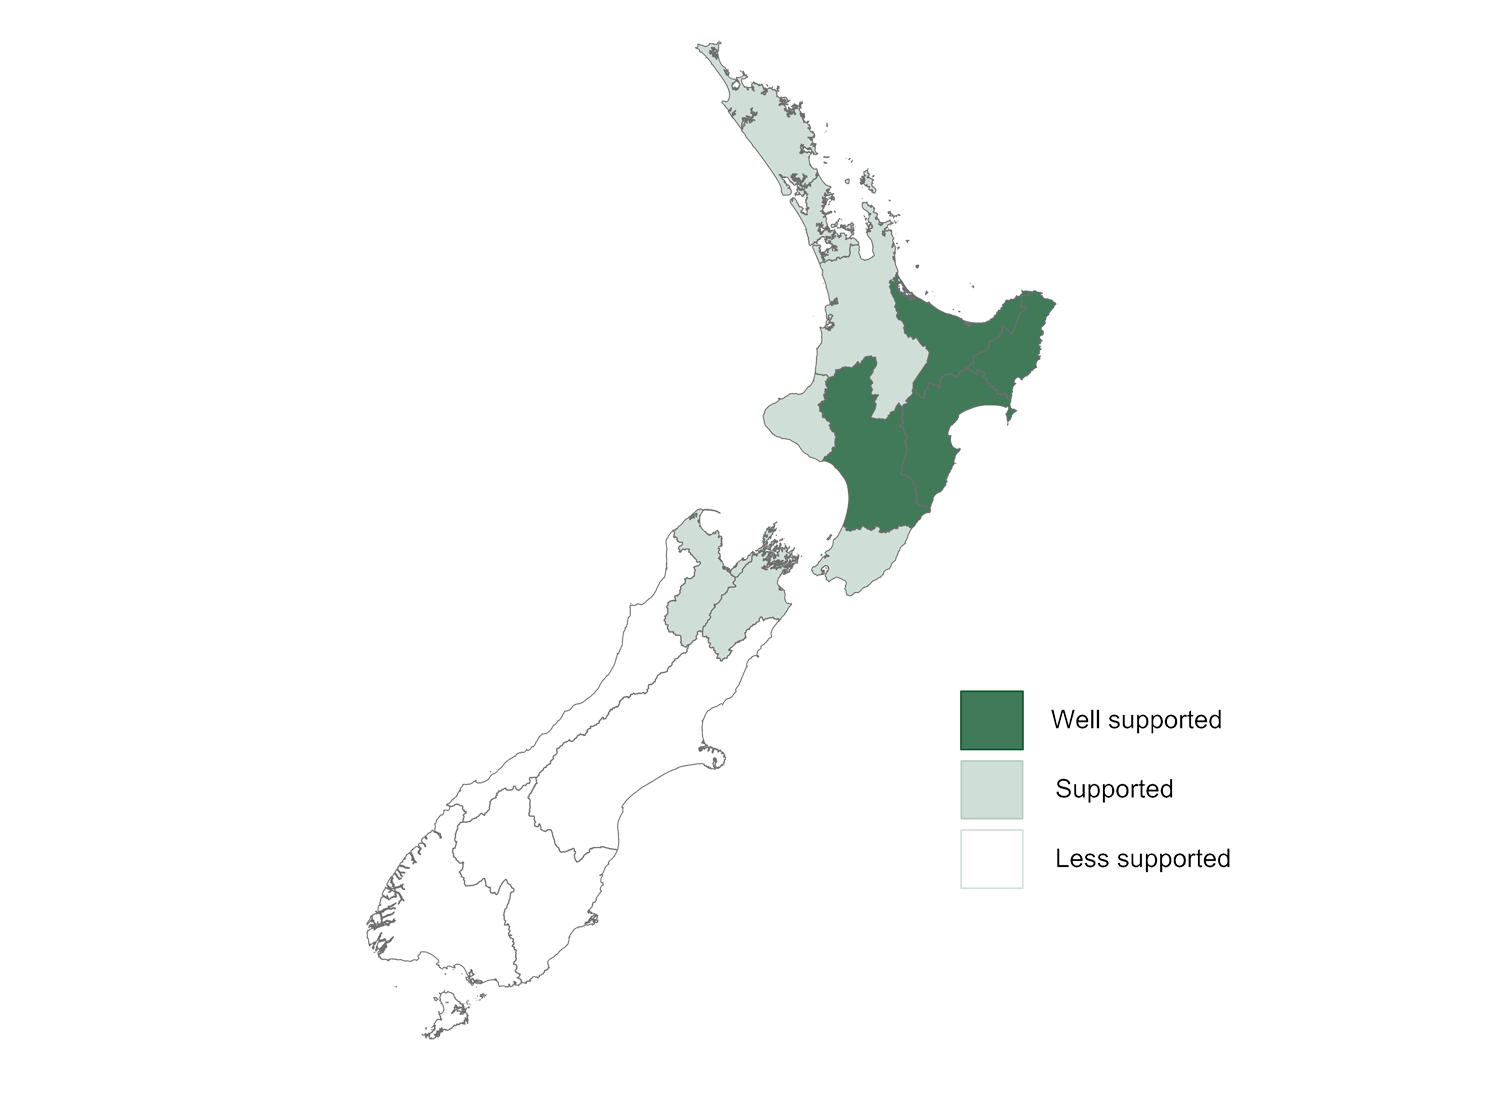 New Zealand map highlighting the best regions for commercial maize grain growing.